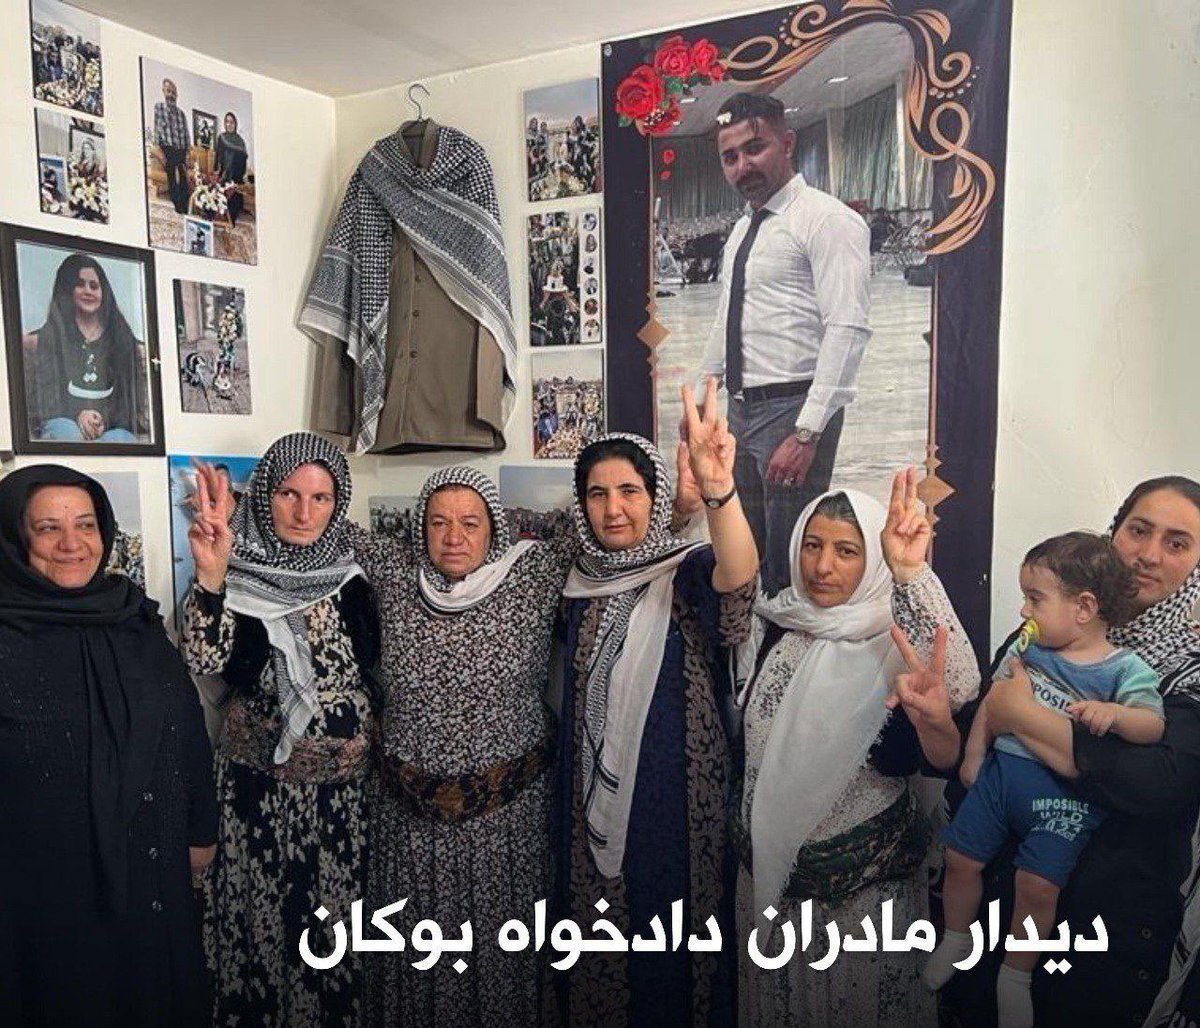 Meeting of mothers whose children were killed by the Islamic Republic.
(Bukan ) 
#MahsaAmini